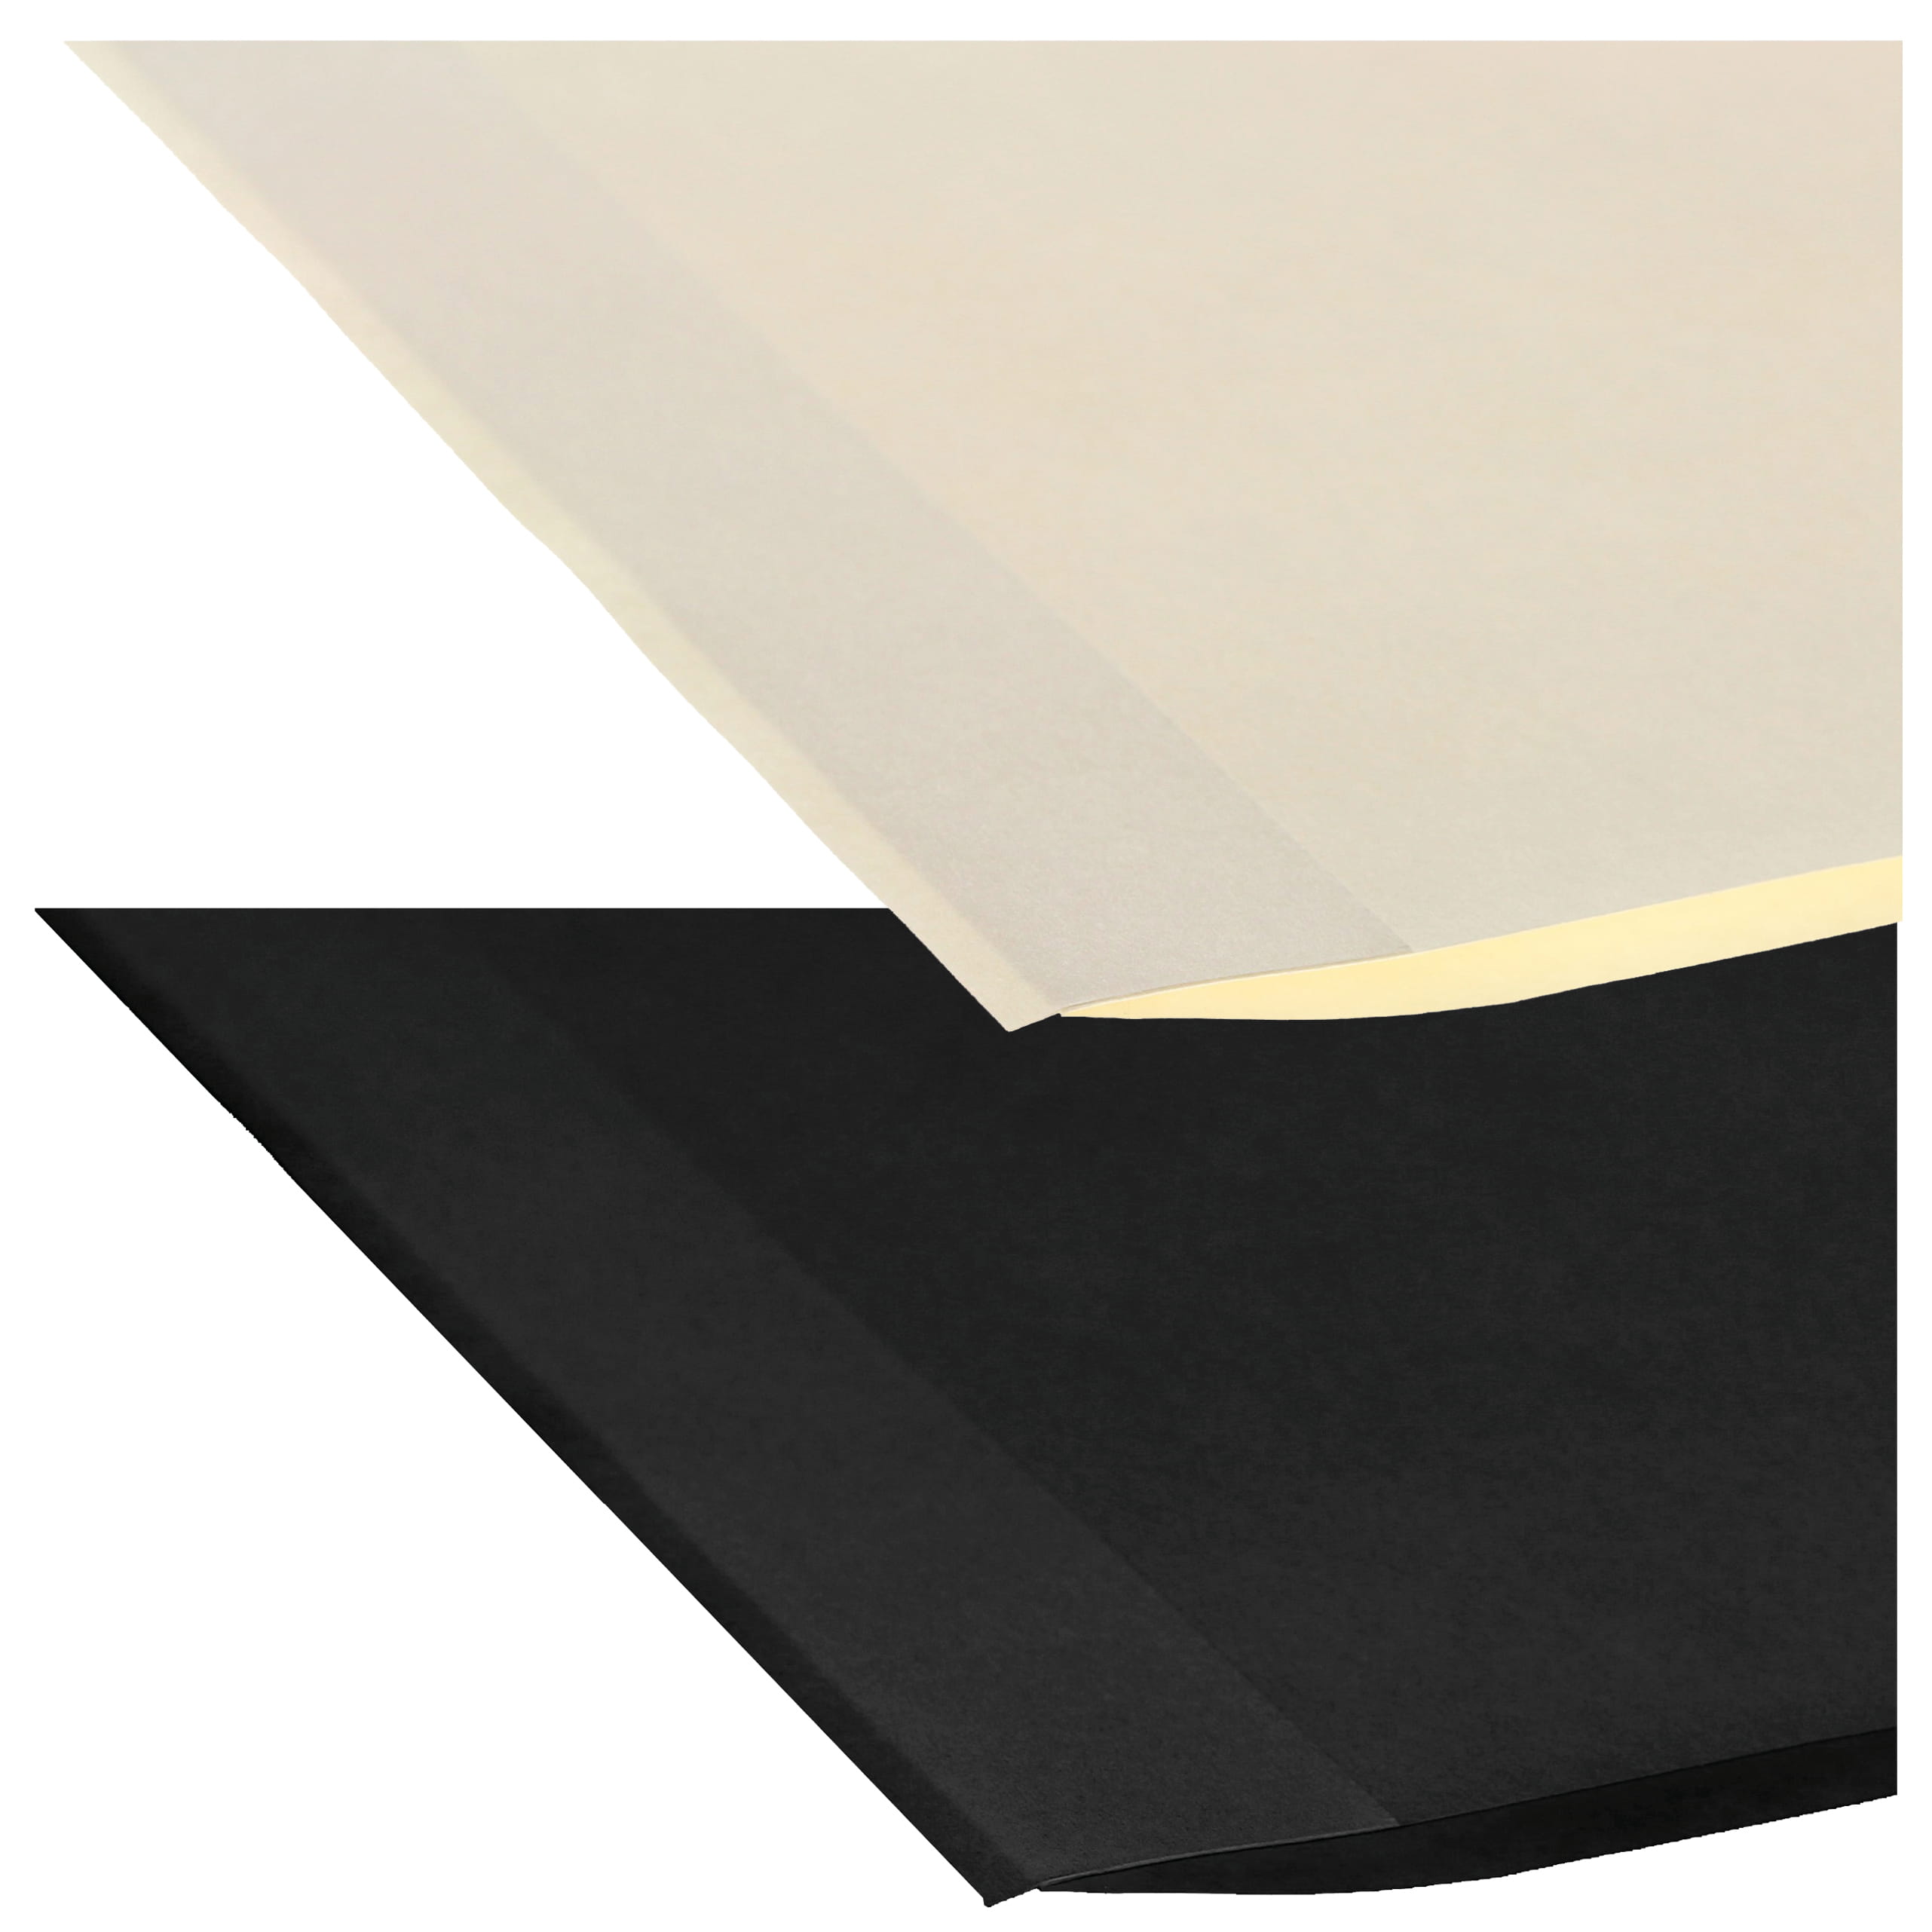 End paper, laid - natural white (yellowish-white)